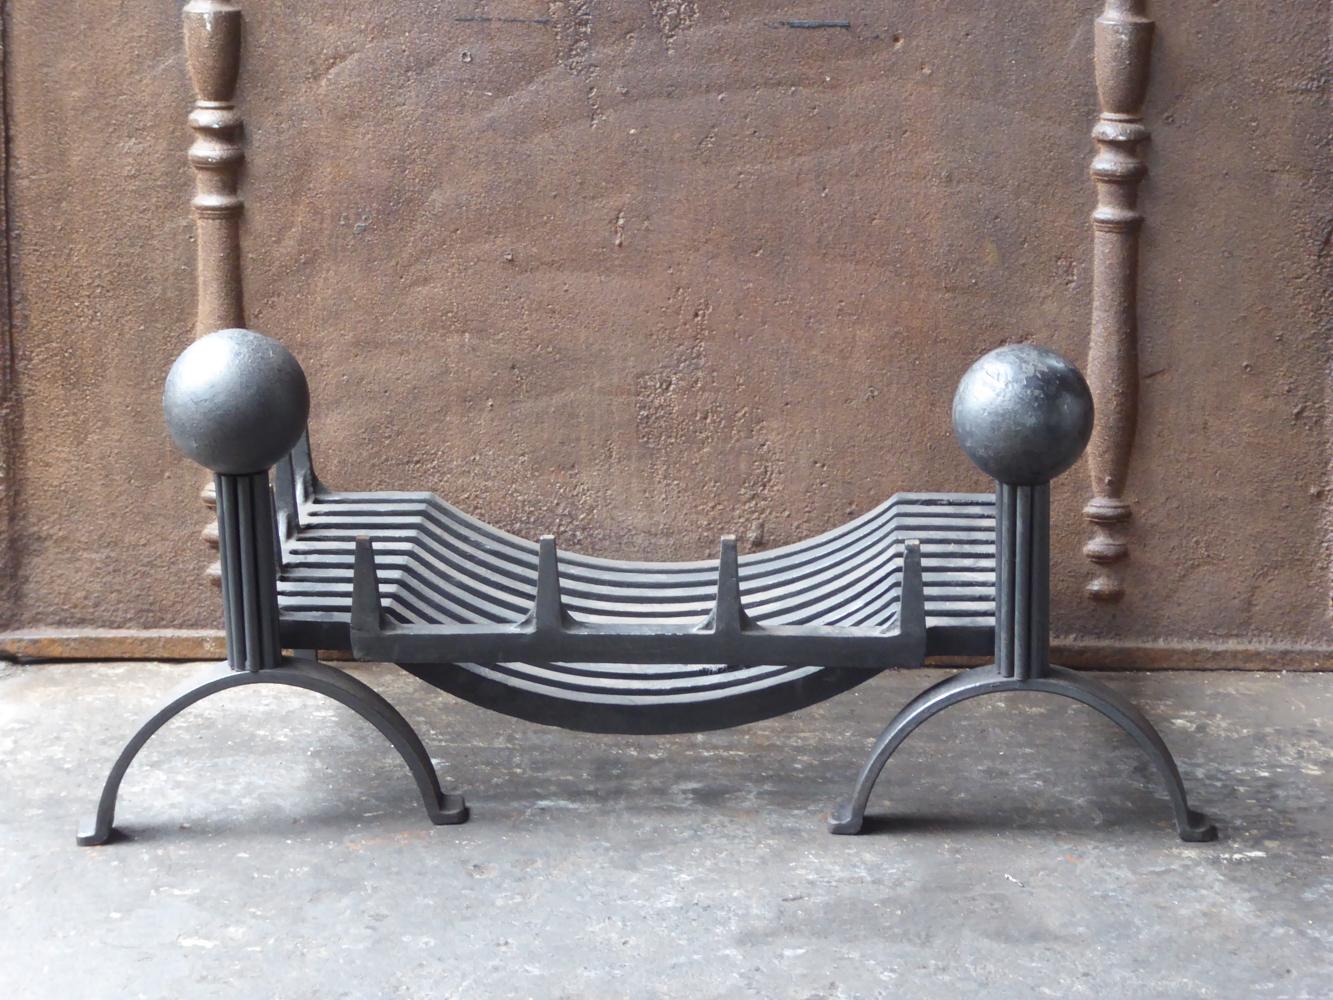 English Victorian style fireplace basket or fire basket. The fireplace grate is made of cast iron and wrought iron. The total width of the front of the grate is 35 inch (89 cm).







 







 

 